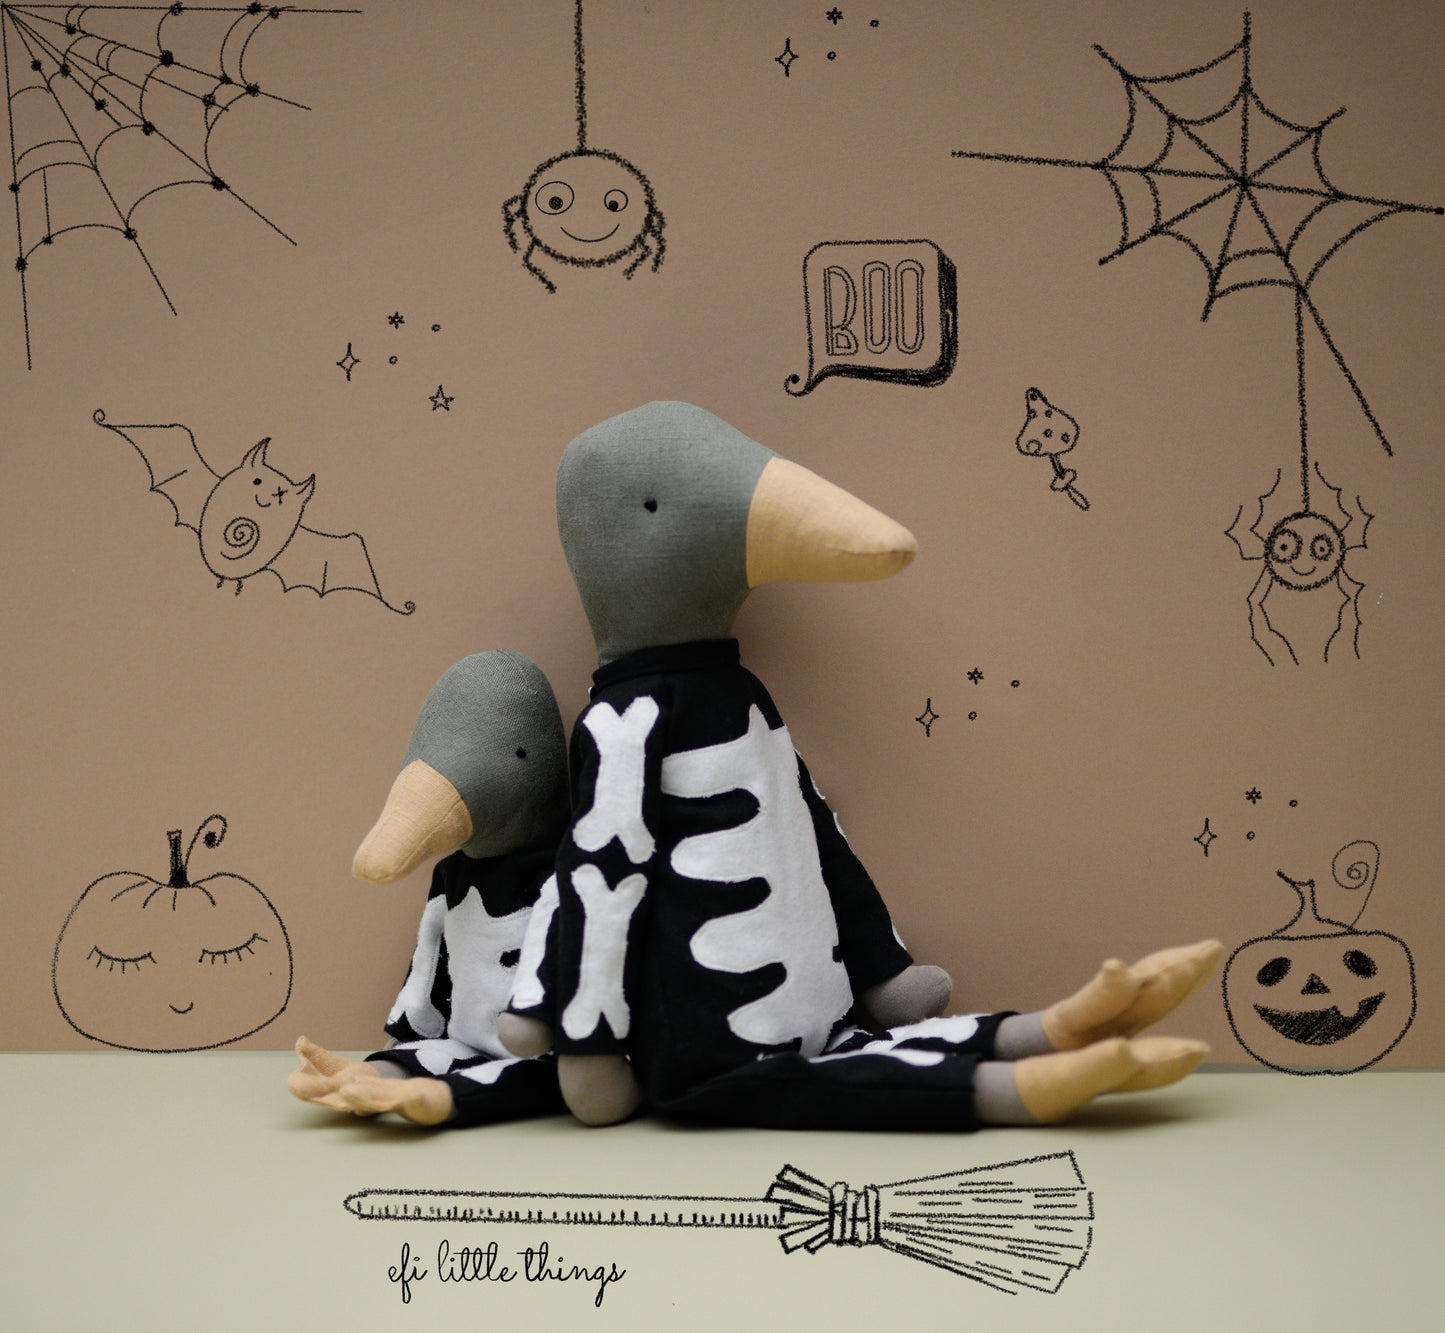 55 cm Duck making kit without any pattern or tutorial